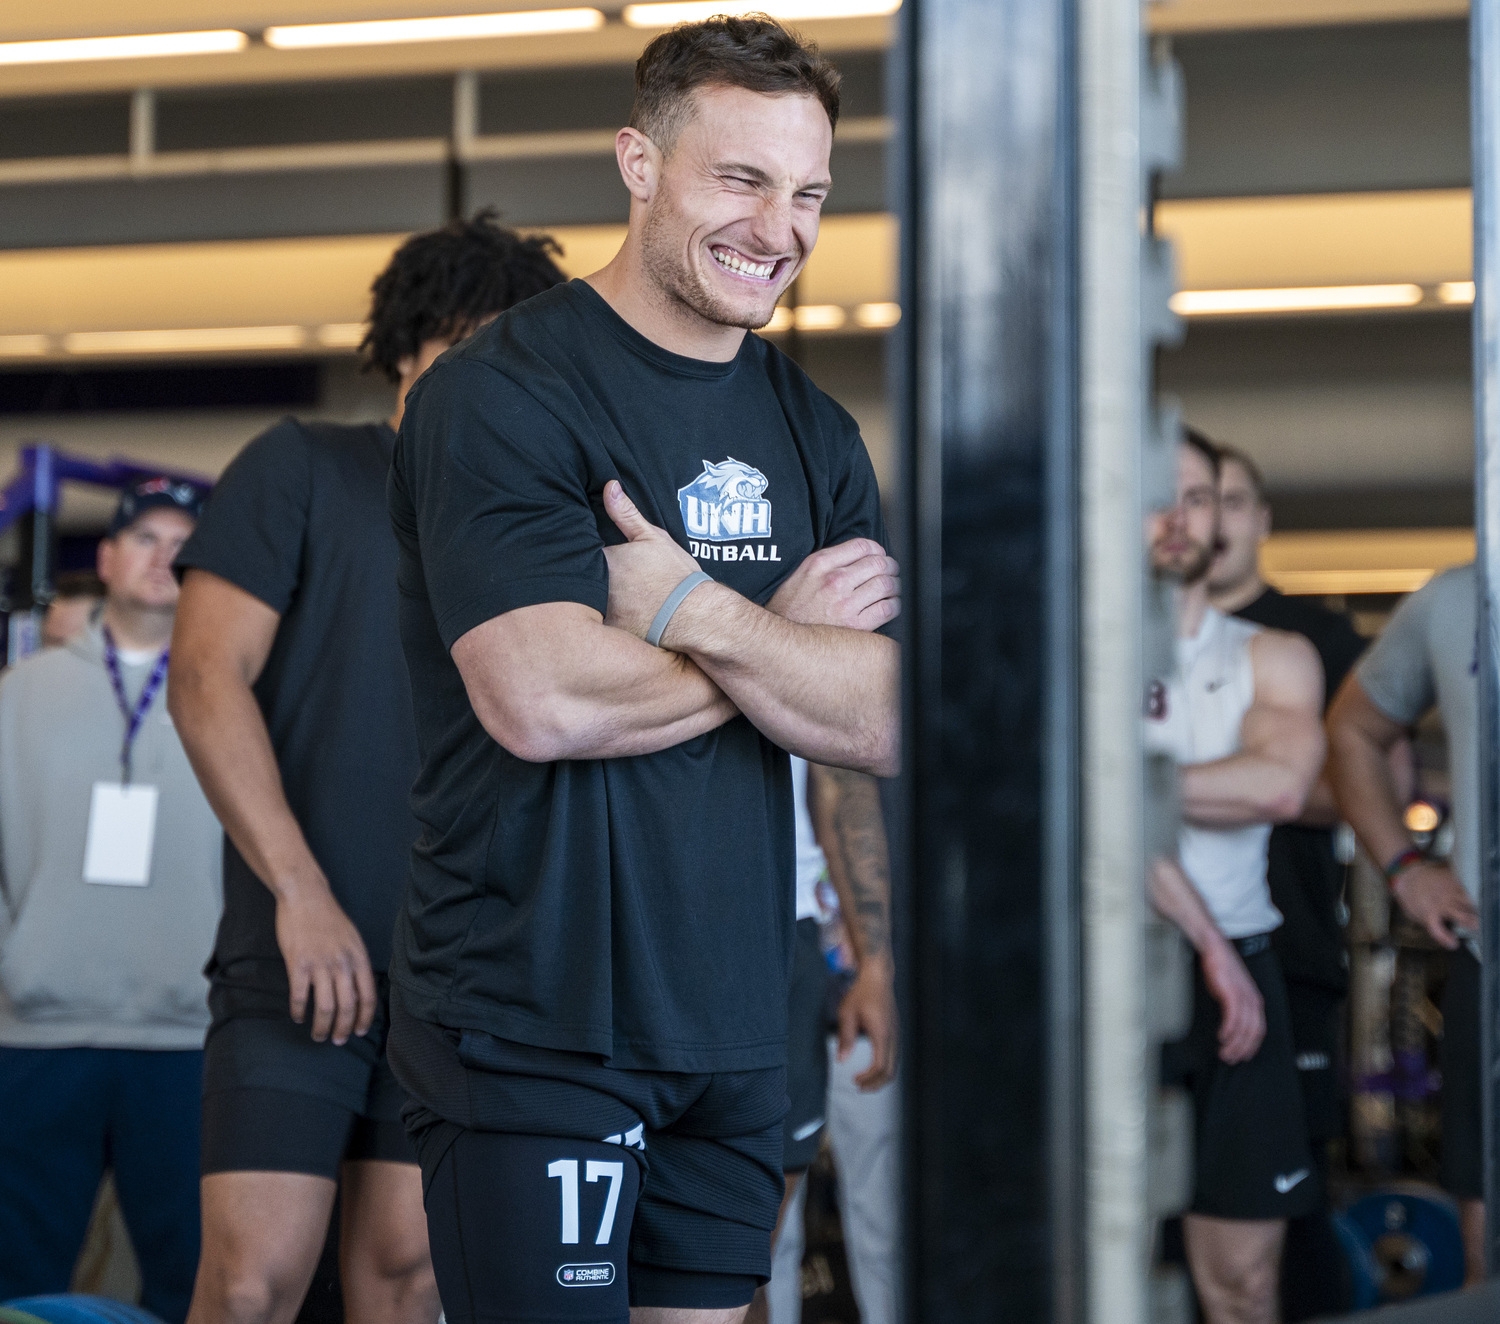 Westhampton Beach and soon-to-be University of New Hampshire graduate Dylan Laube during College of the Holy Cross's annual NFL Pro Day March 21. UNH Athletics/Patrick Donnelly